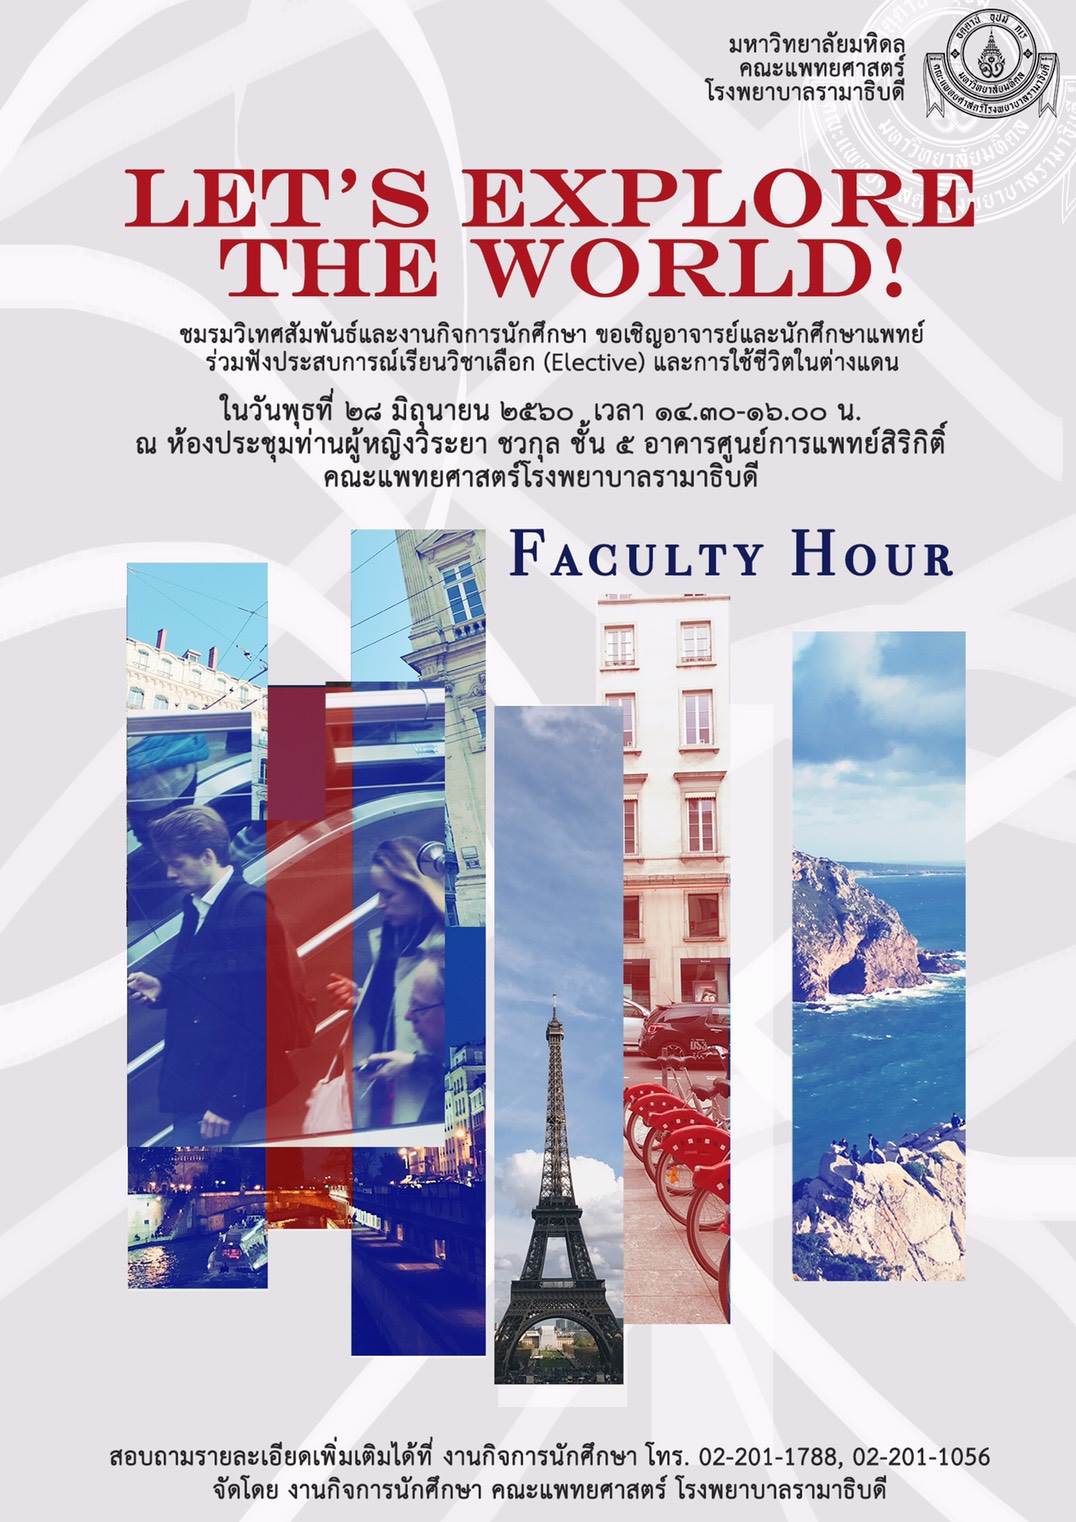 Faculty Hours “Let’s explore the World!”